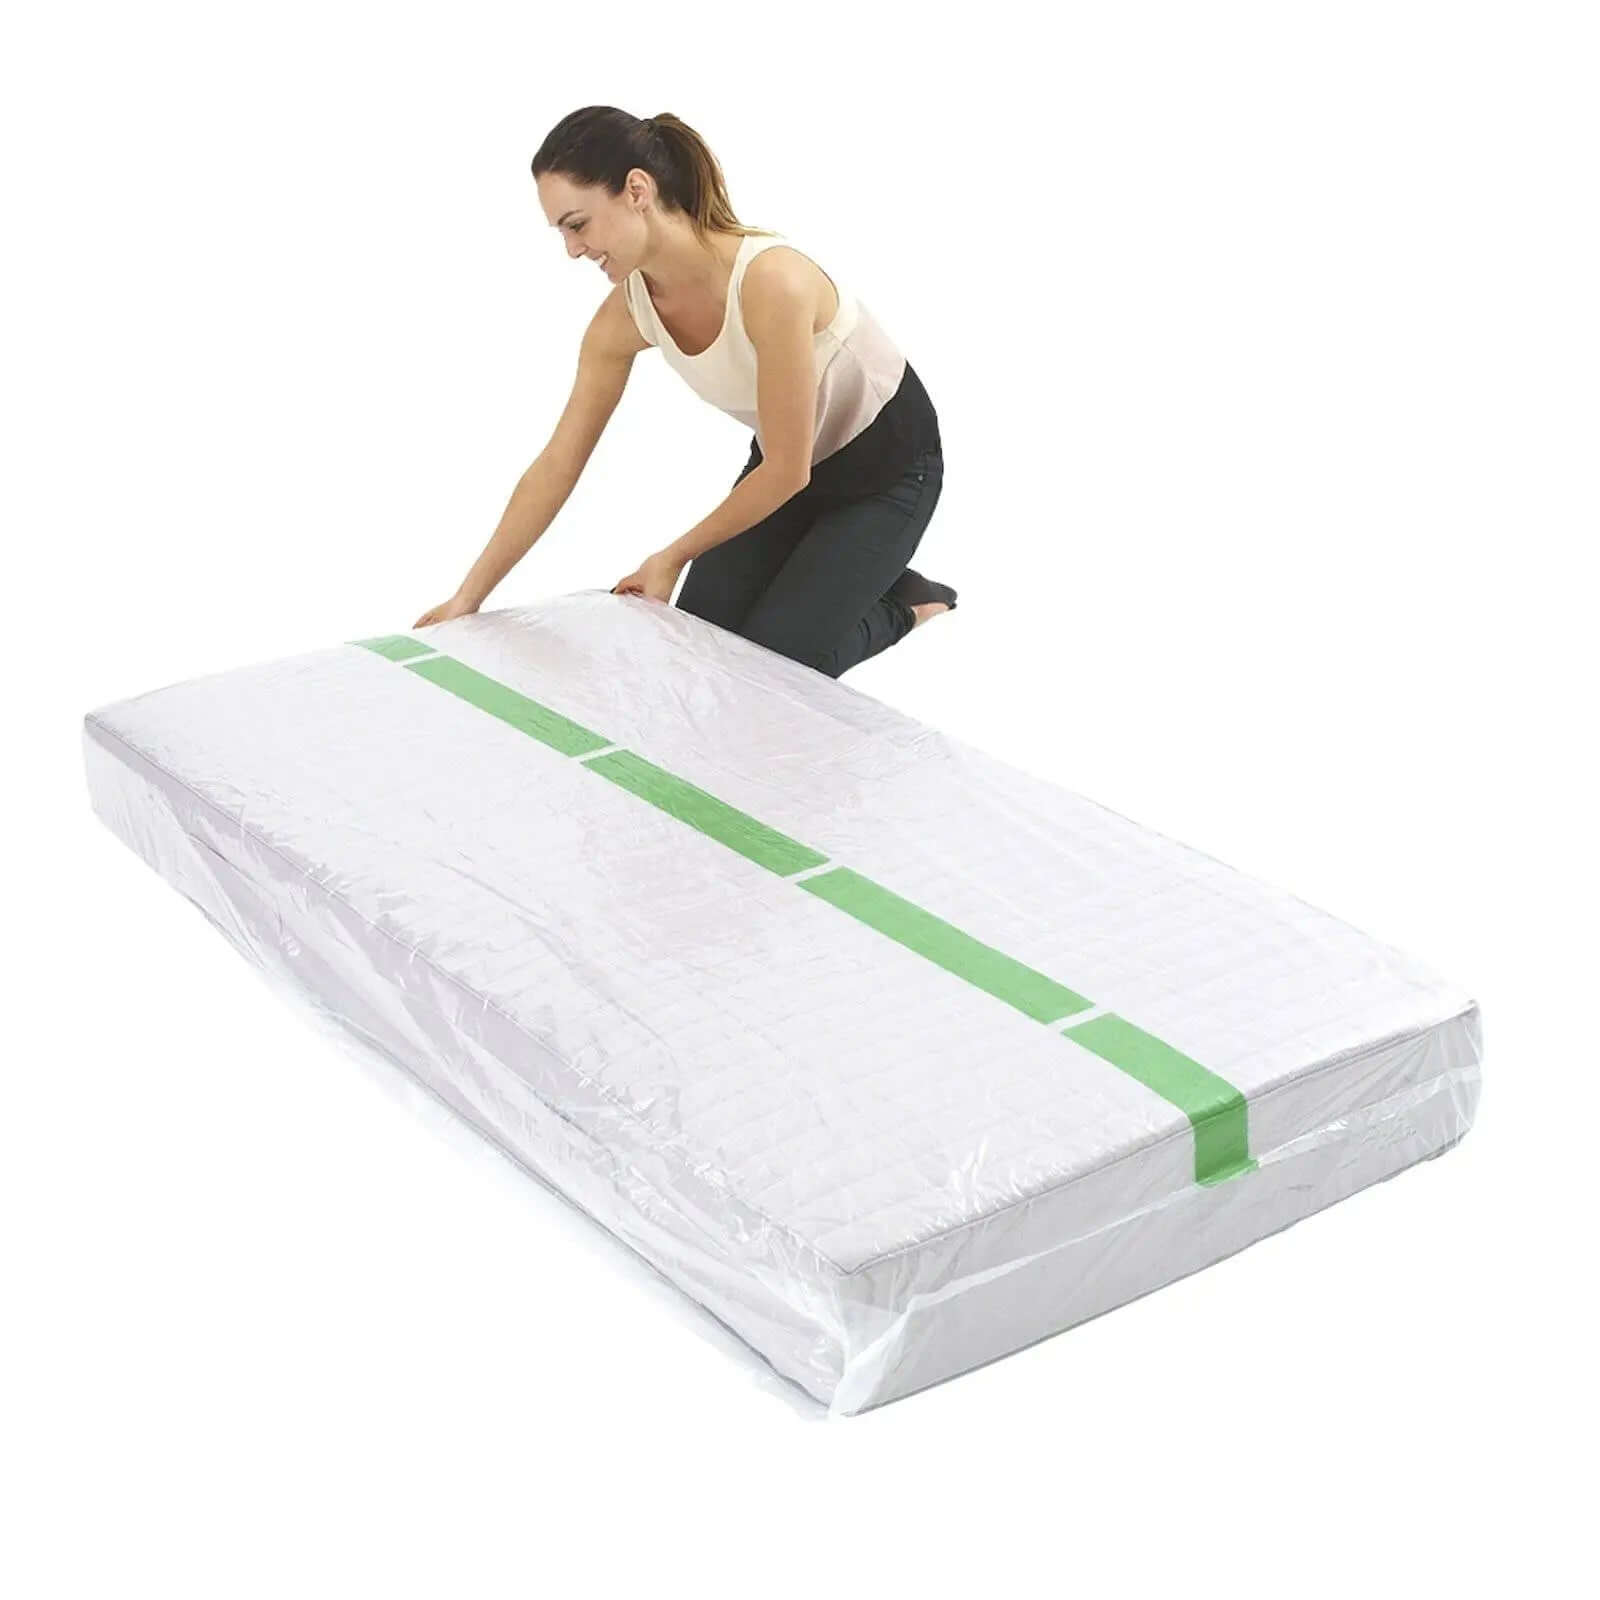 Heavy Duty Mattress Cover for Moving and Storage - Single/Twin | Storage Bags and Covers | Packstore